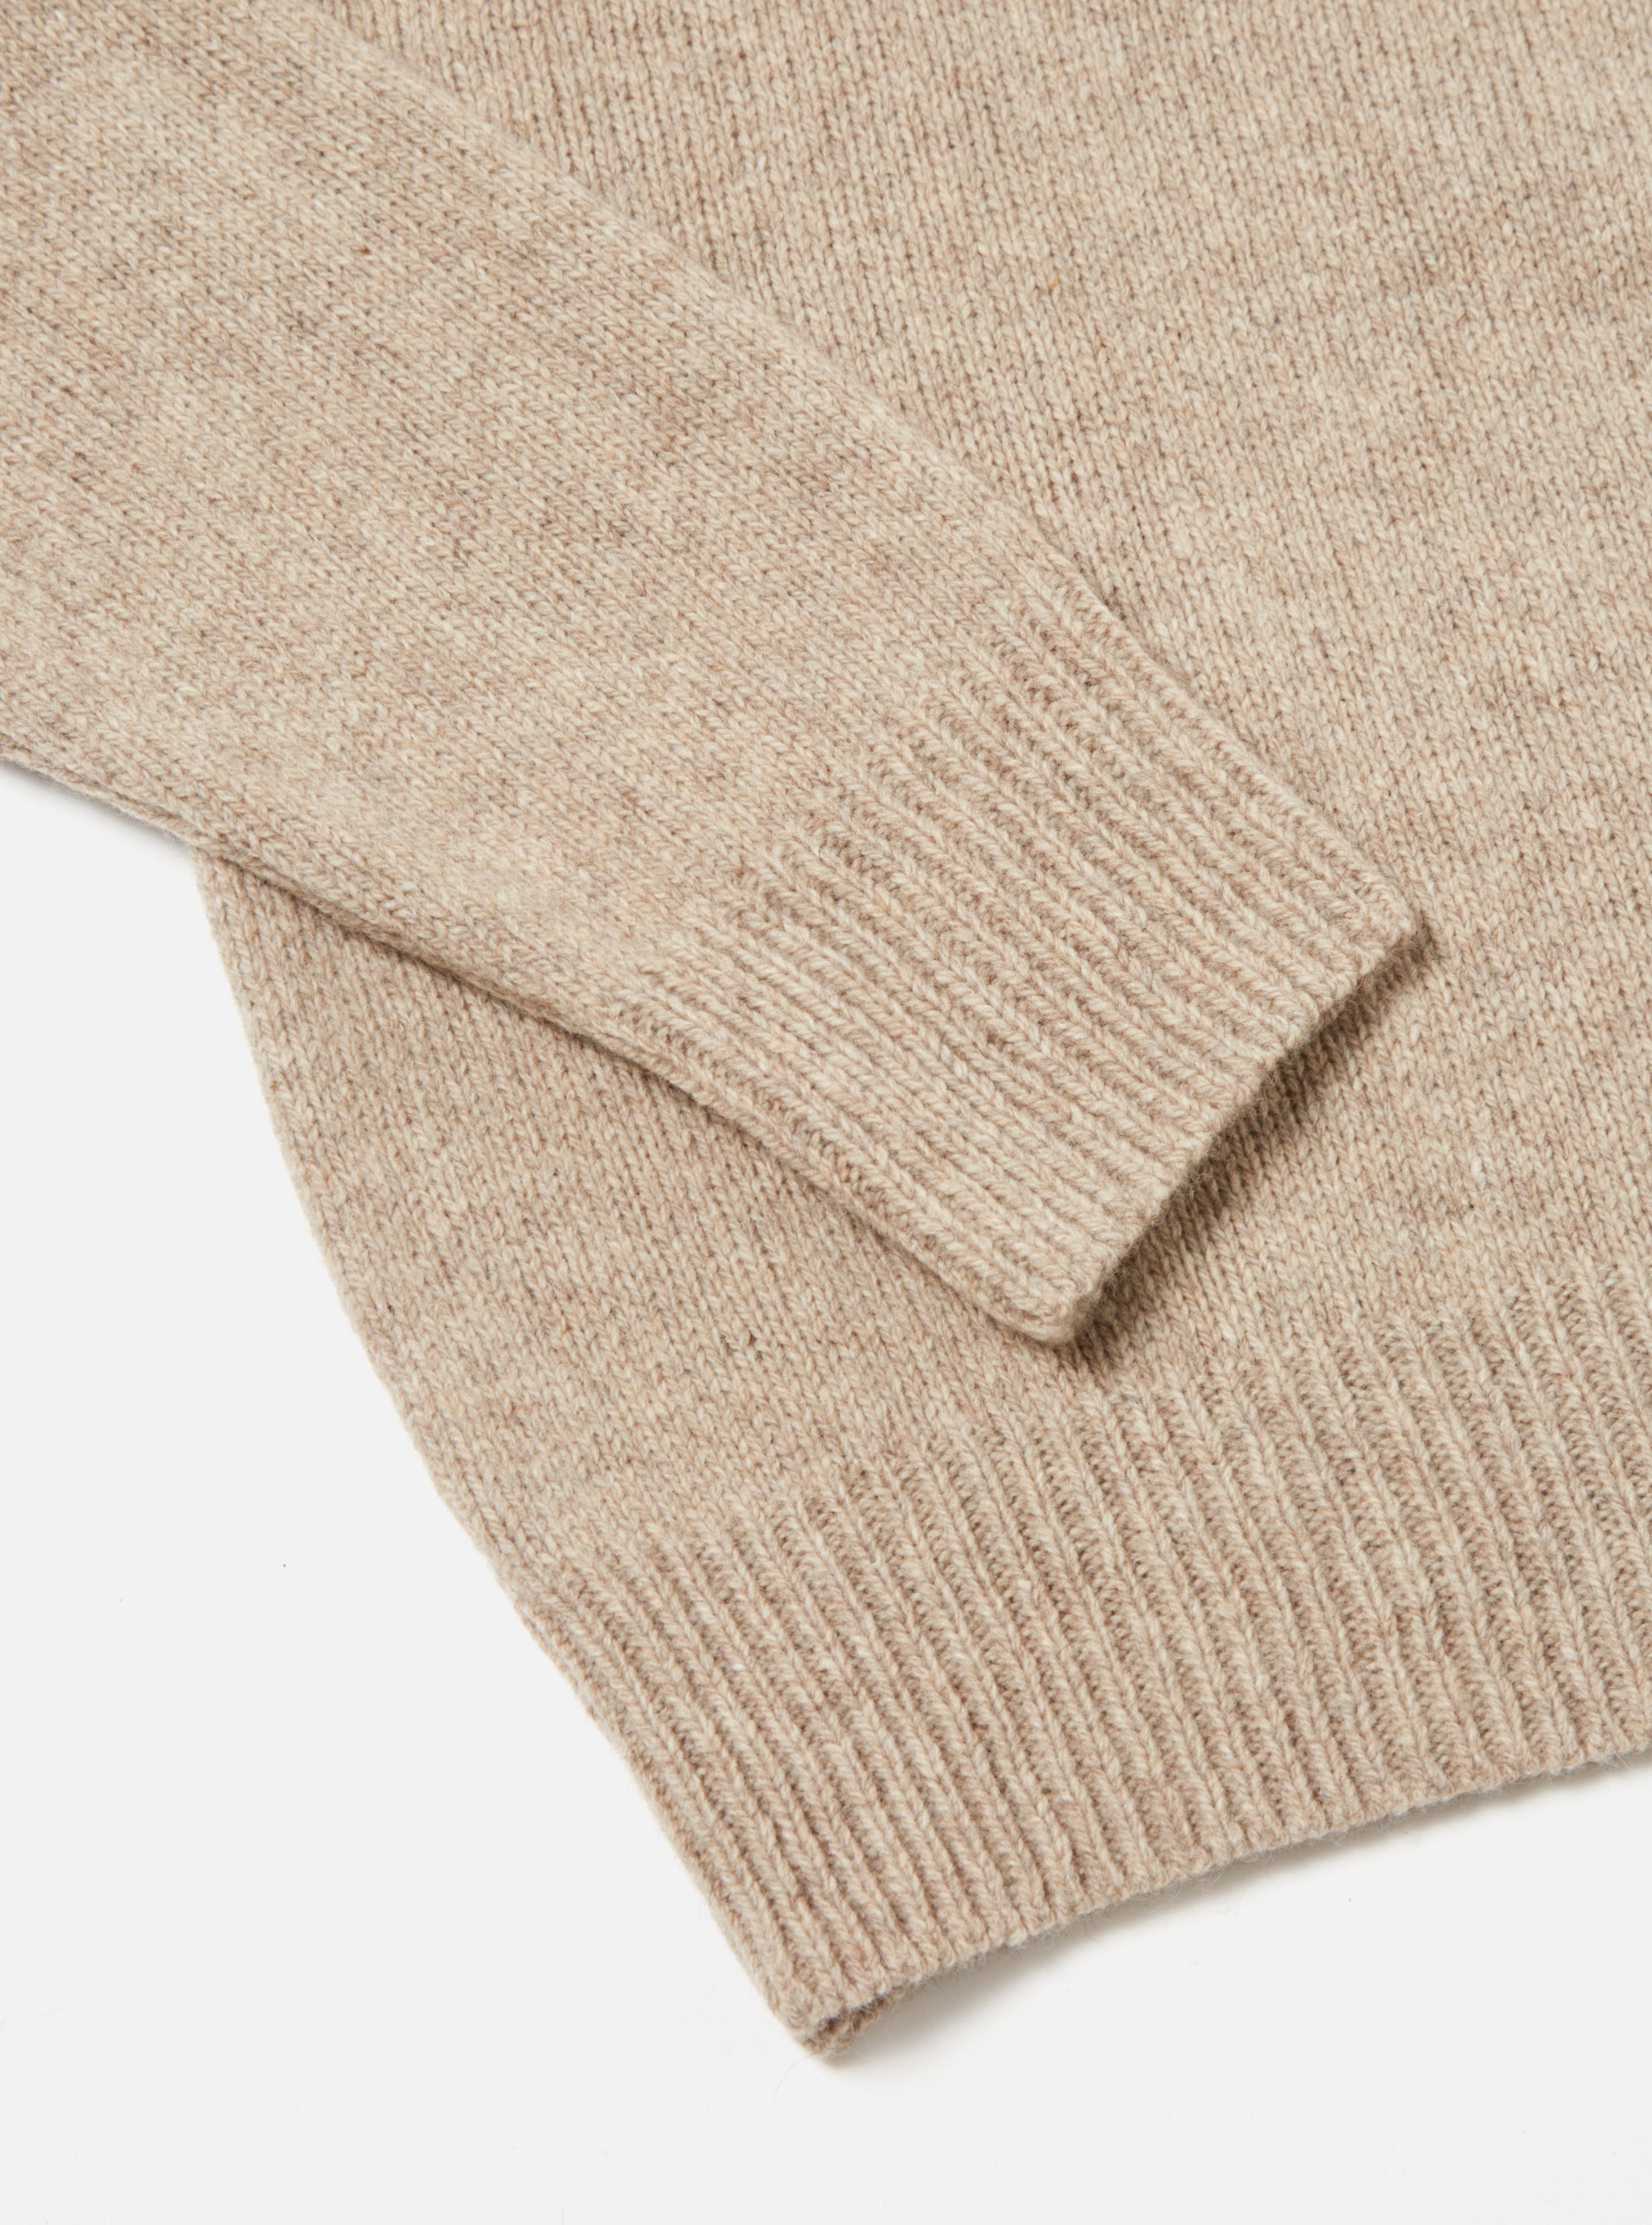 Universal Works V Neck Sweater in Oatmeal Eco Wool